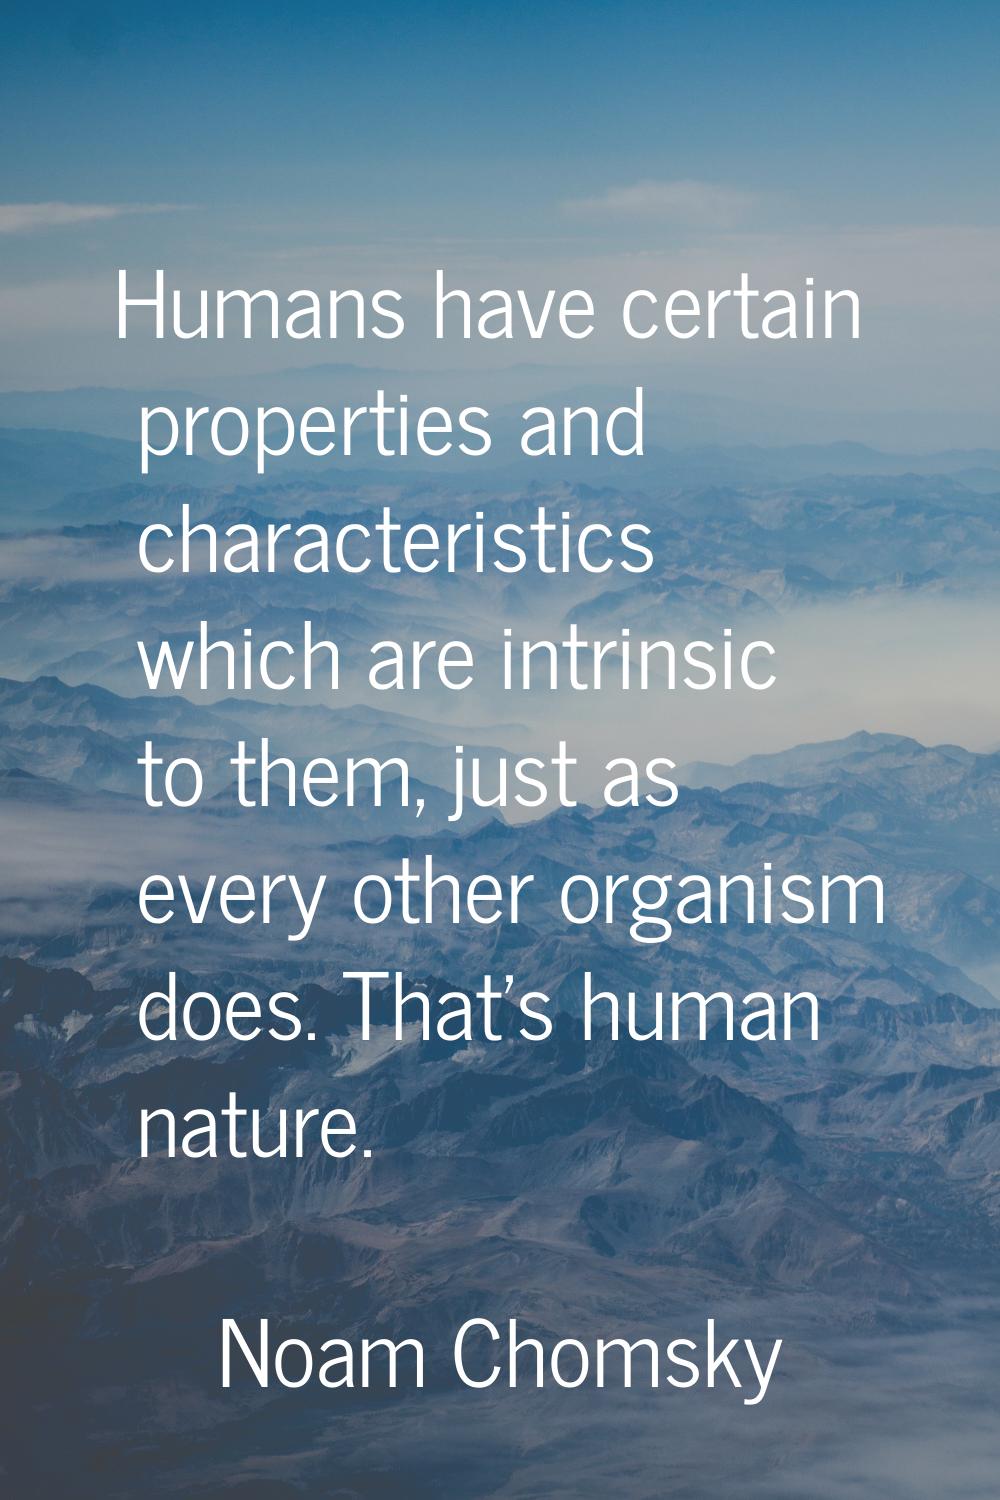 Humans have certain properties and characteristics which are intrinsic to them, just as every other